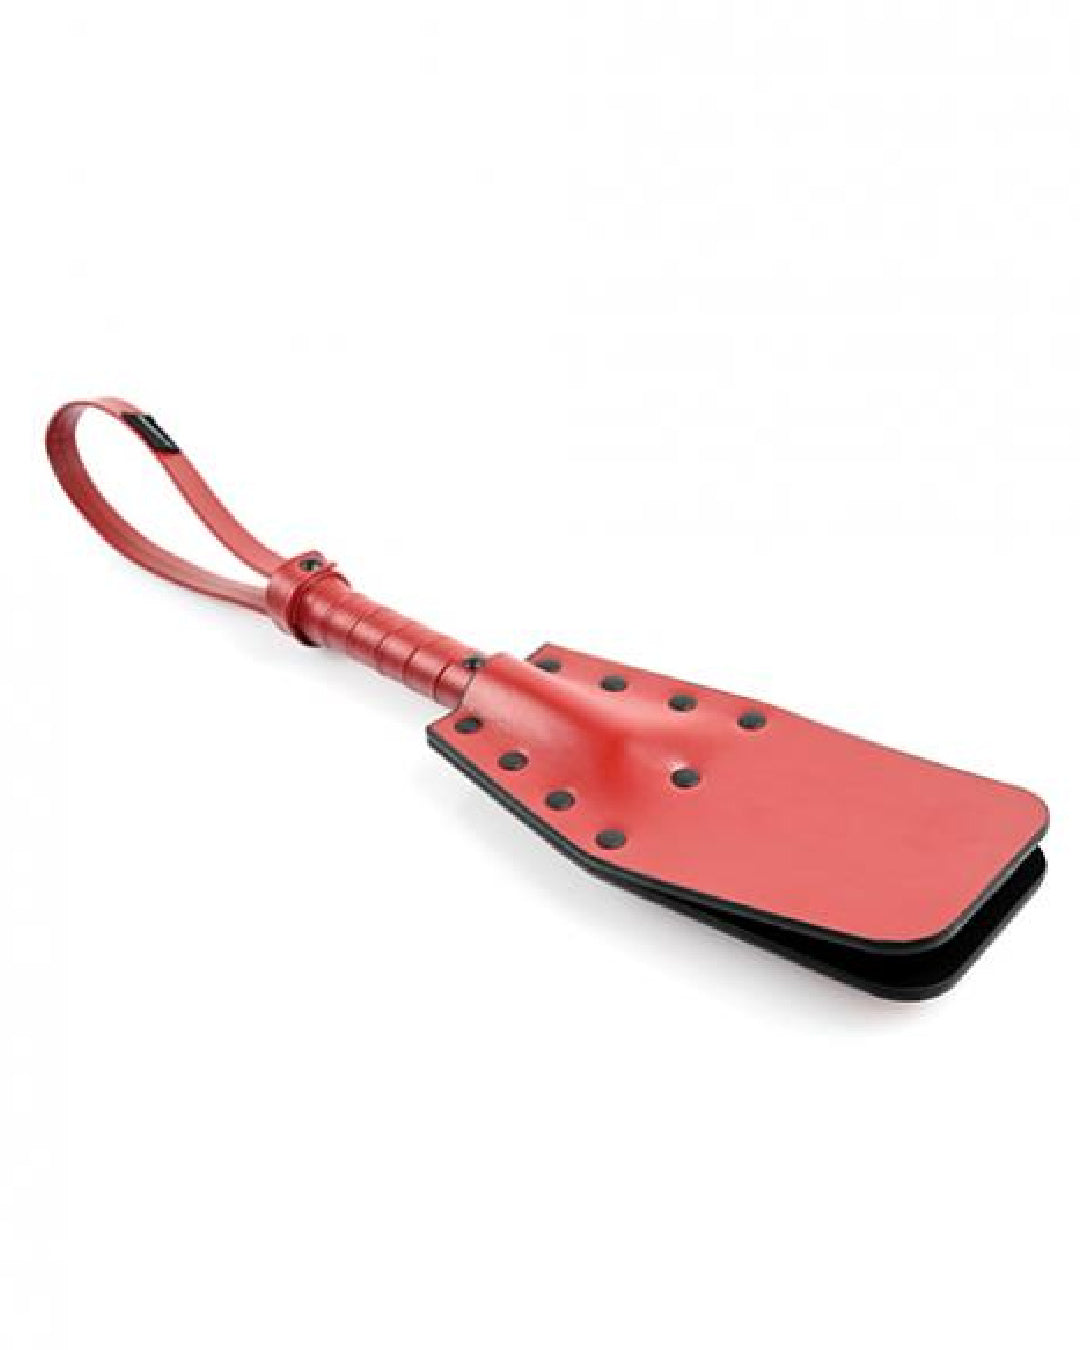 Saffron Studded Spanker Paddle by Sportsheets red paddle on side angle on white background 